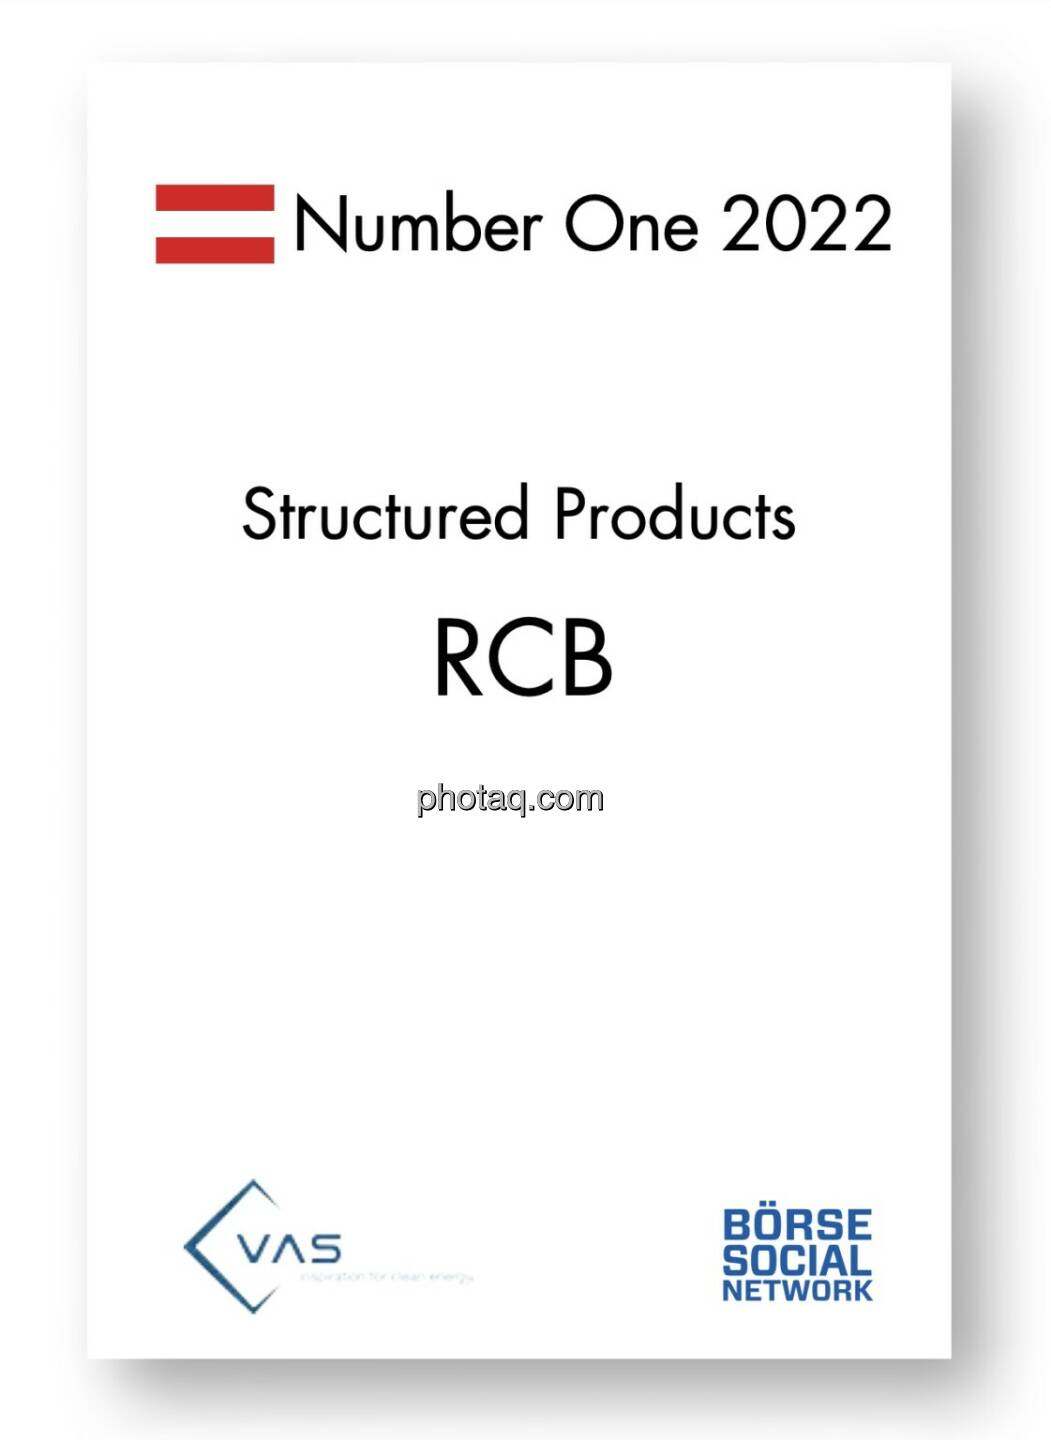 Number One Structured Products: RCB